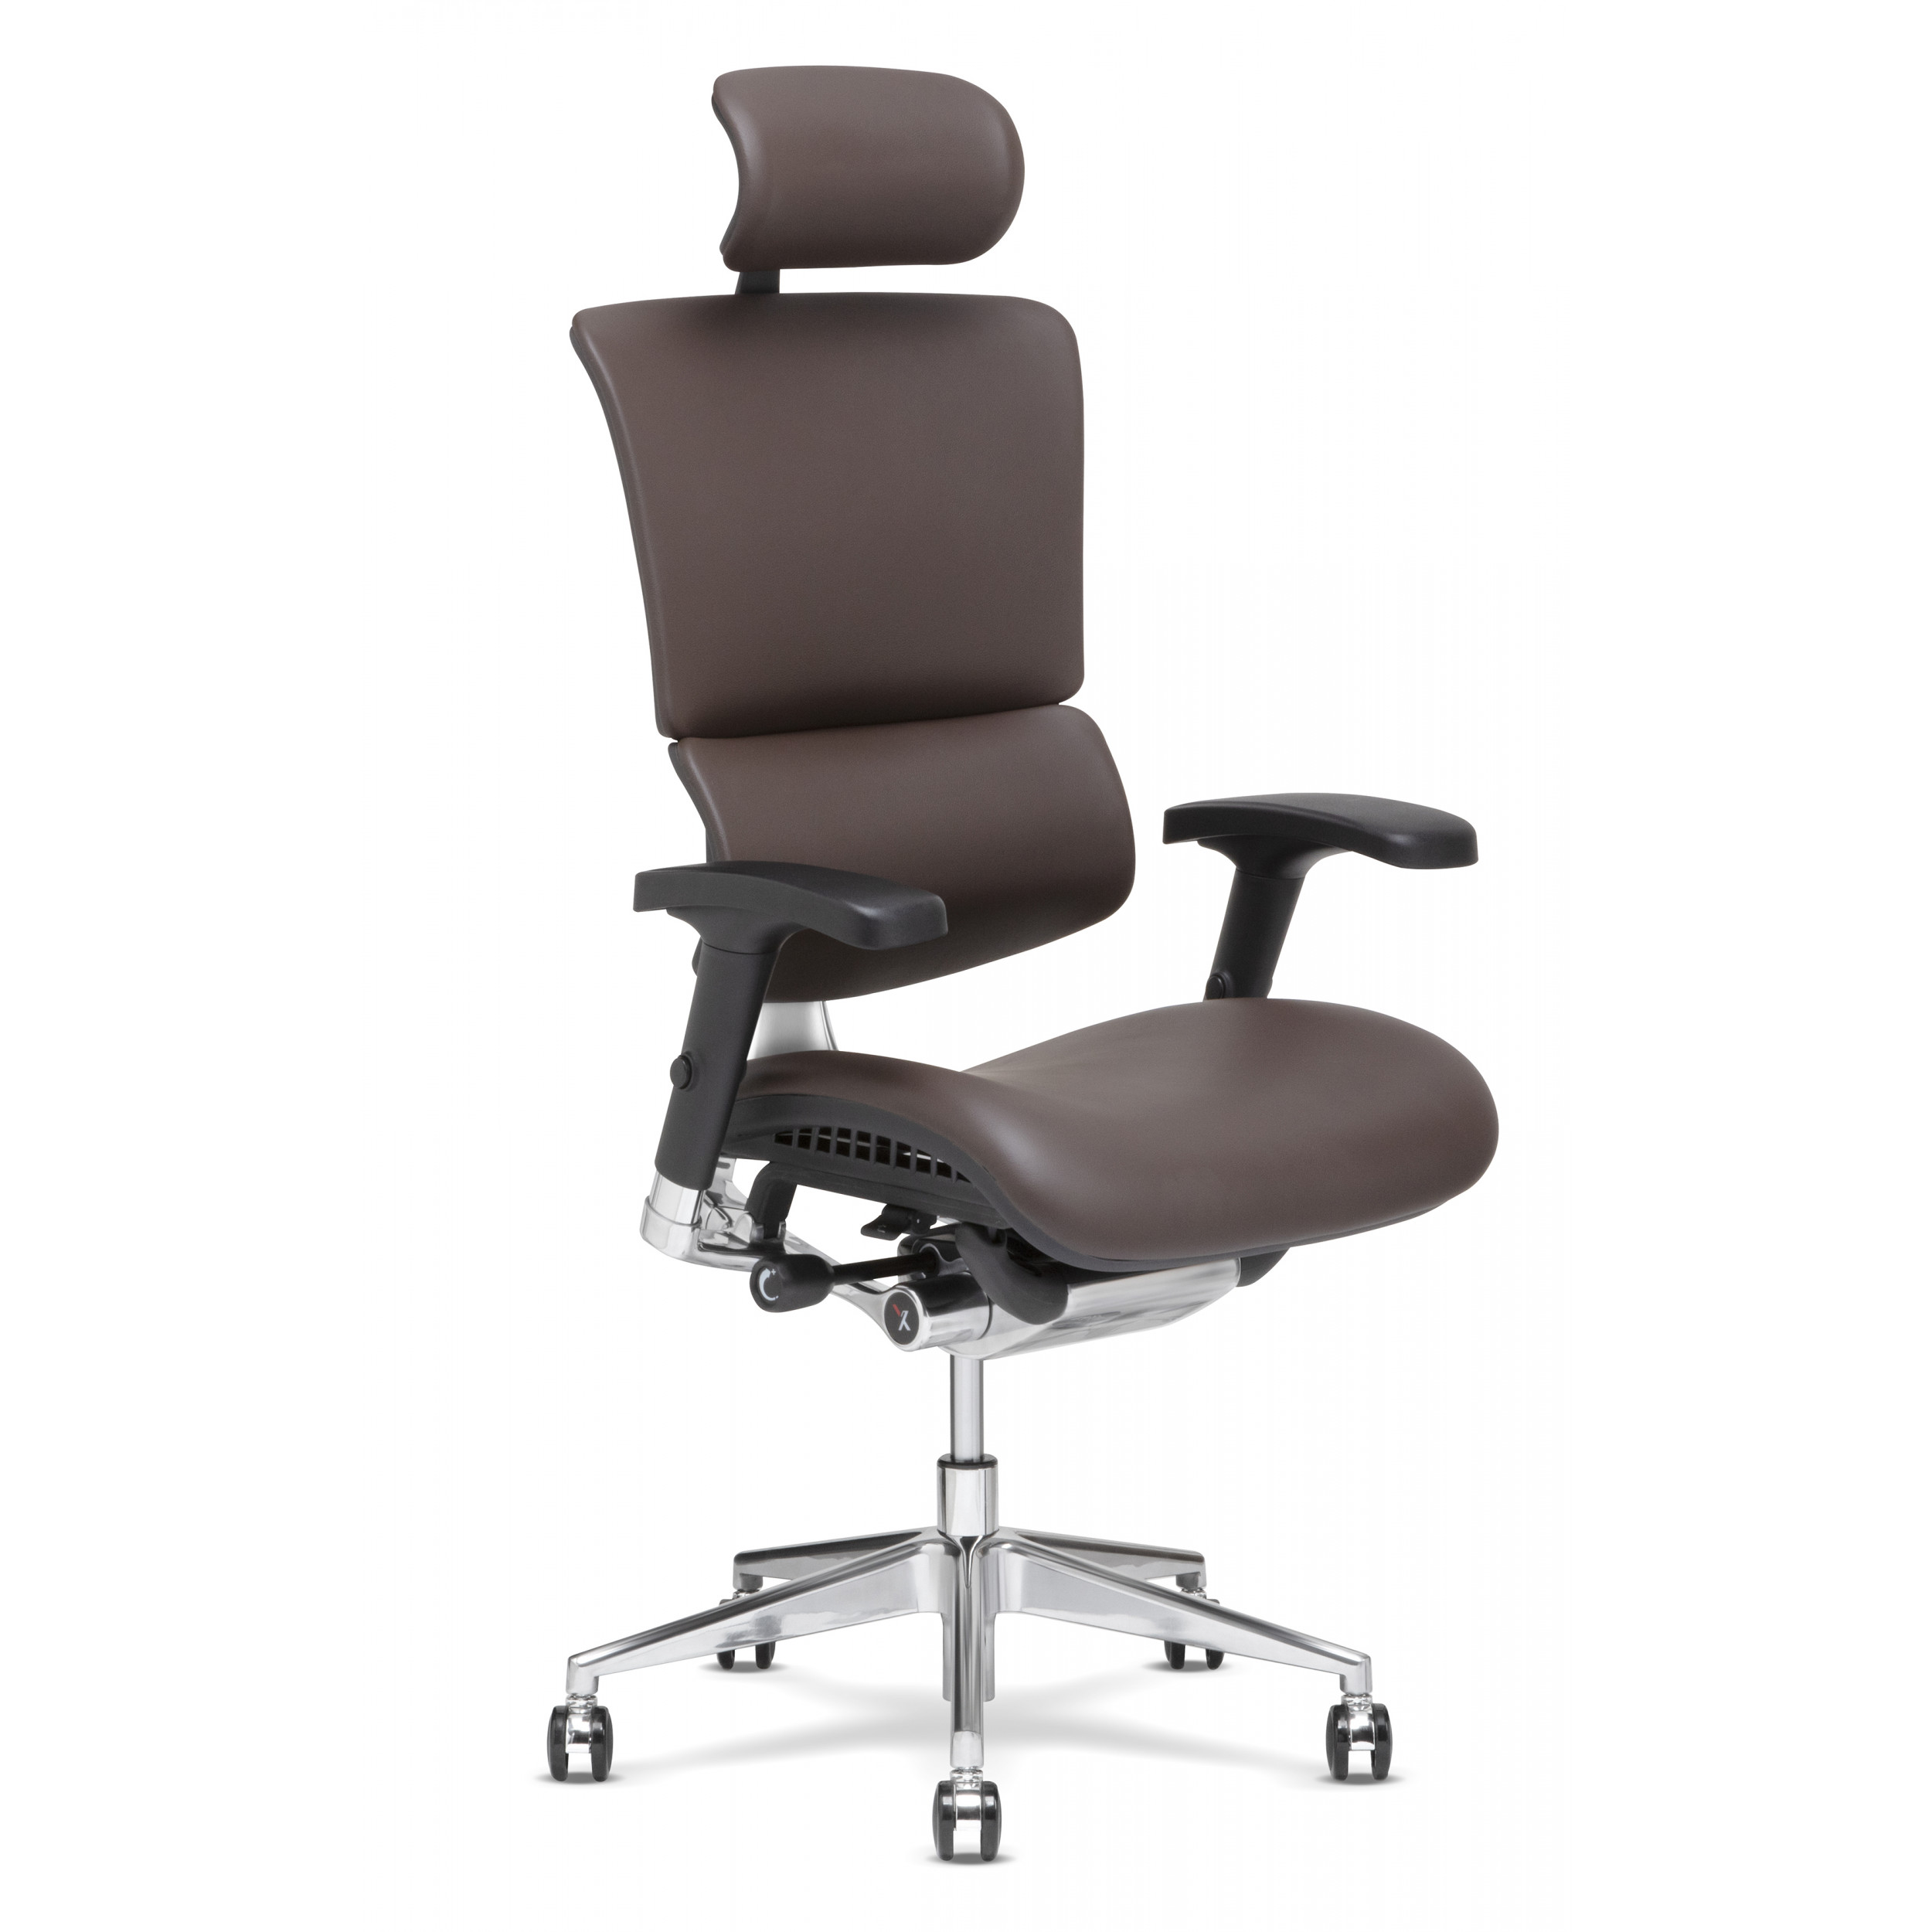 X Chair X4 Leather Executive Office Chair - Customizable